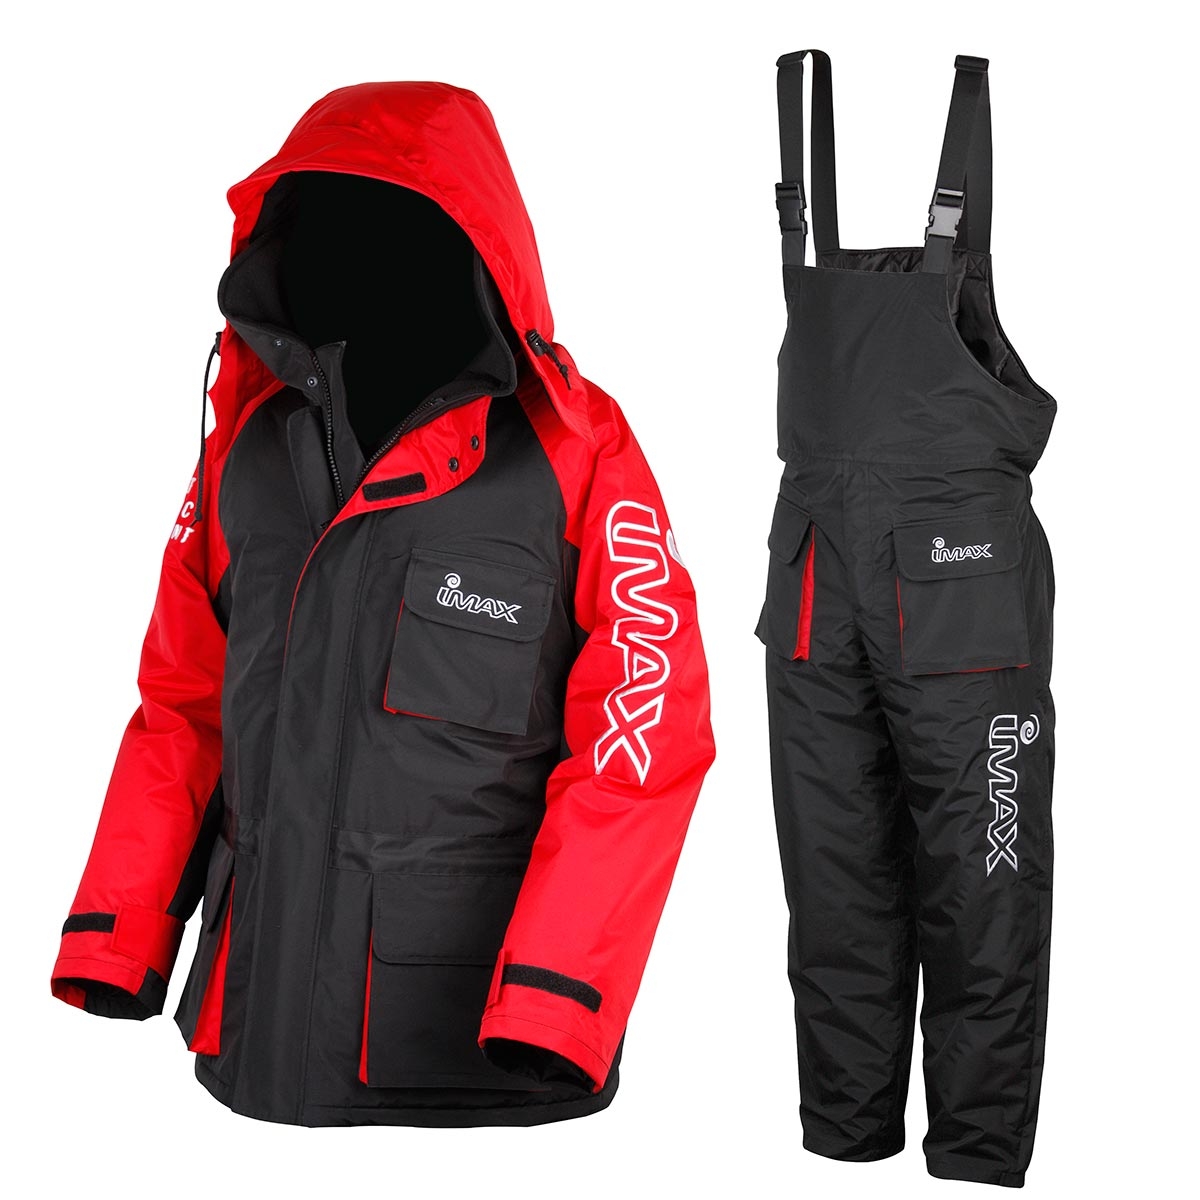 Shop Waterproof Fishing Suits & Floatation Suits - Angling Active